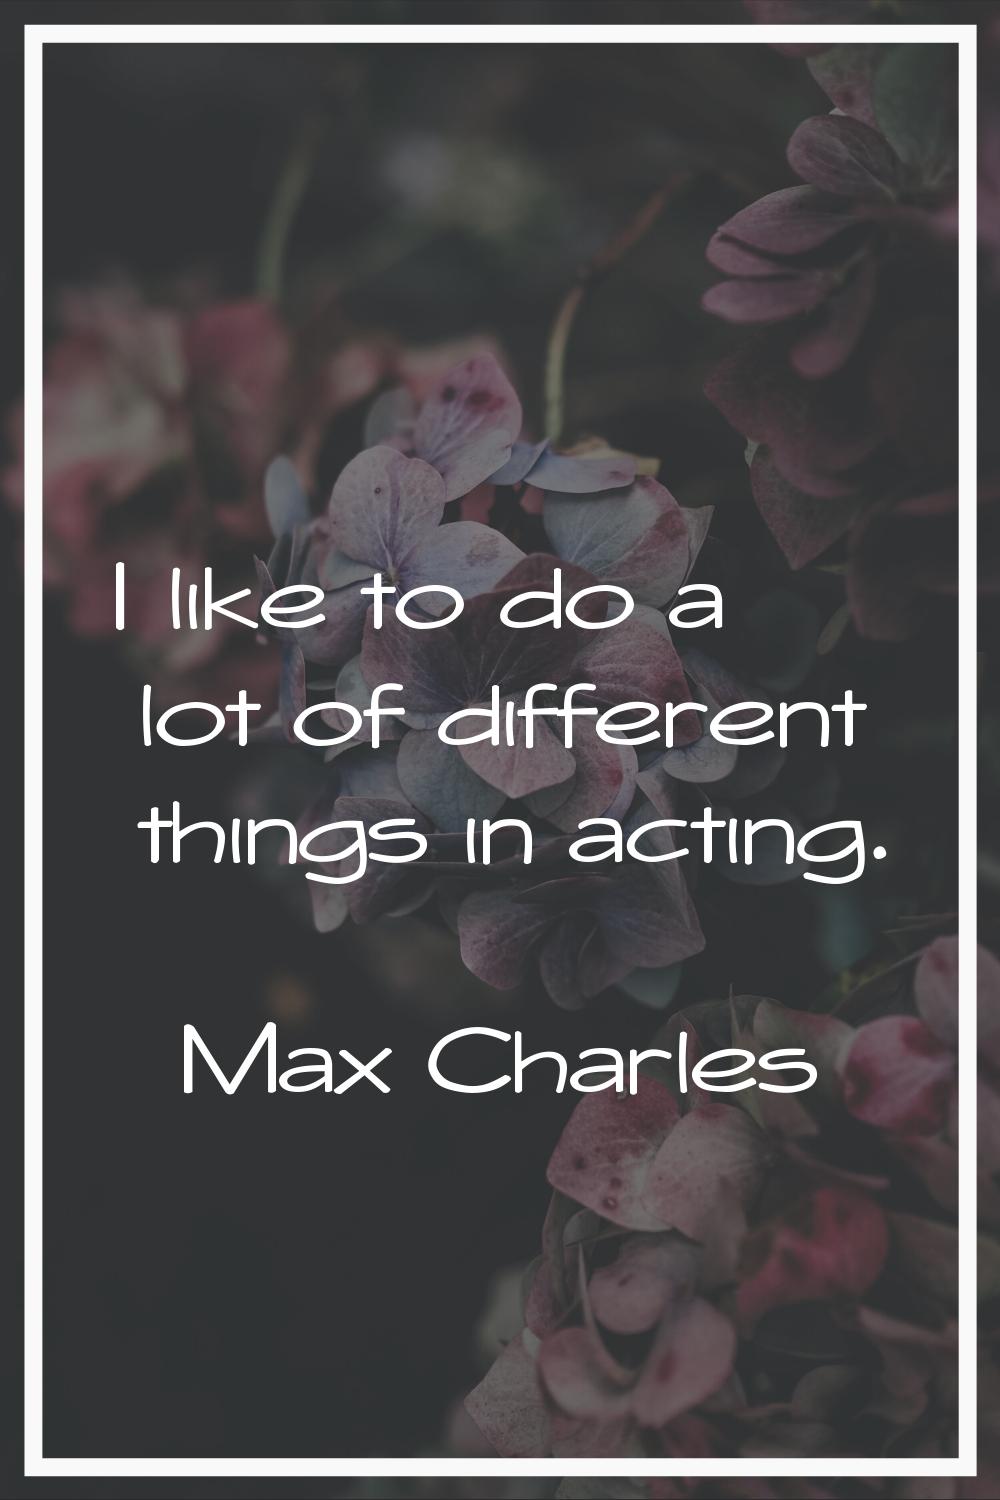 I like to do a lot of different things in acting.